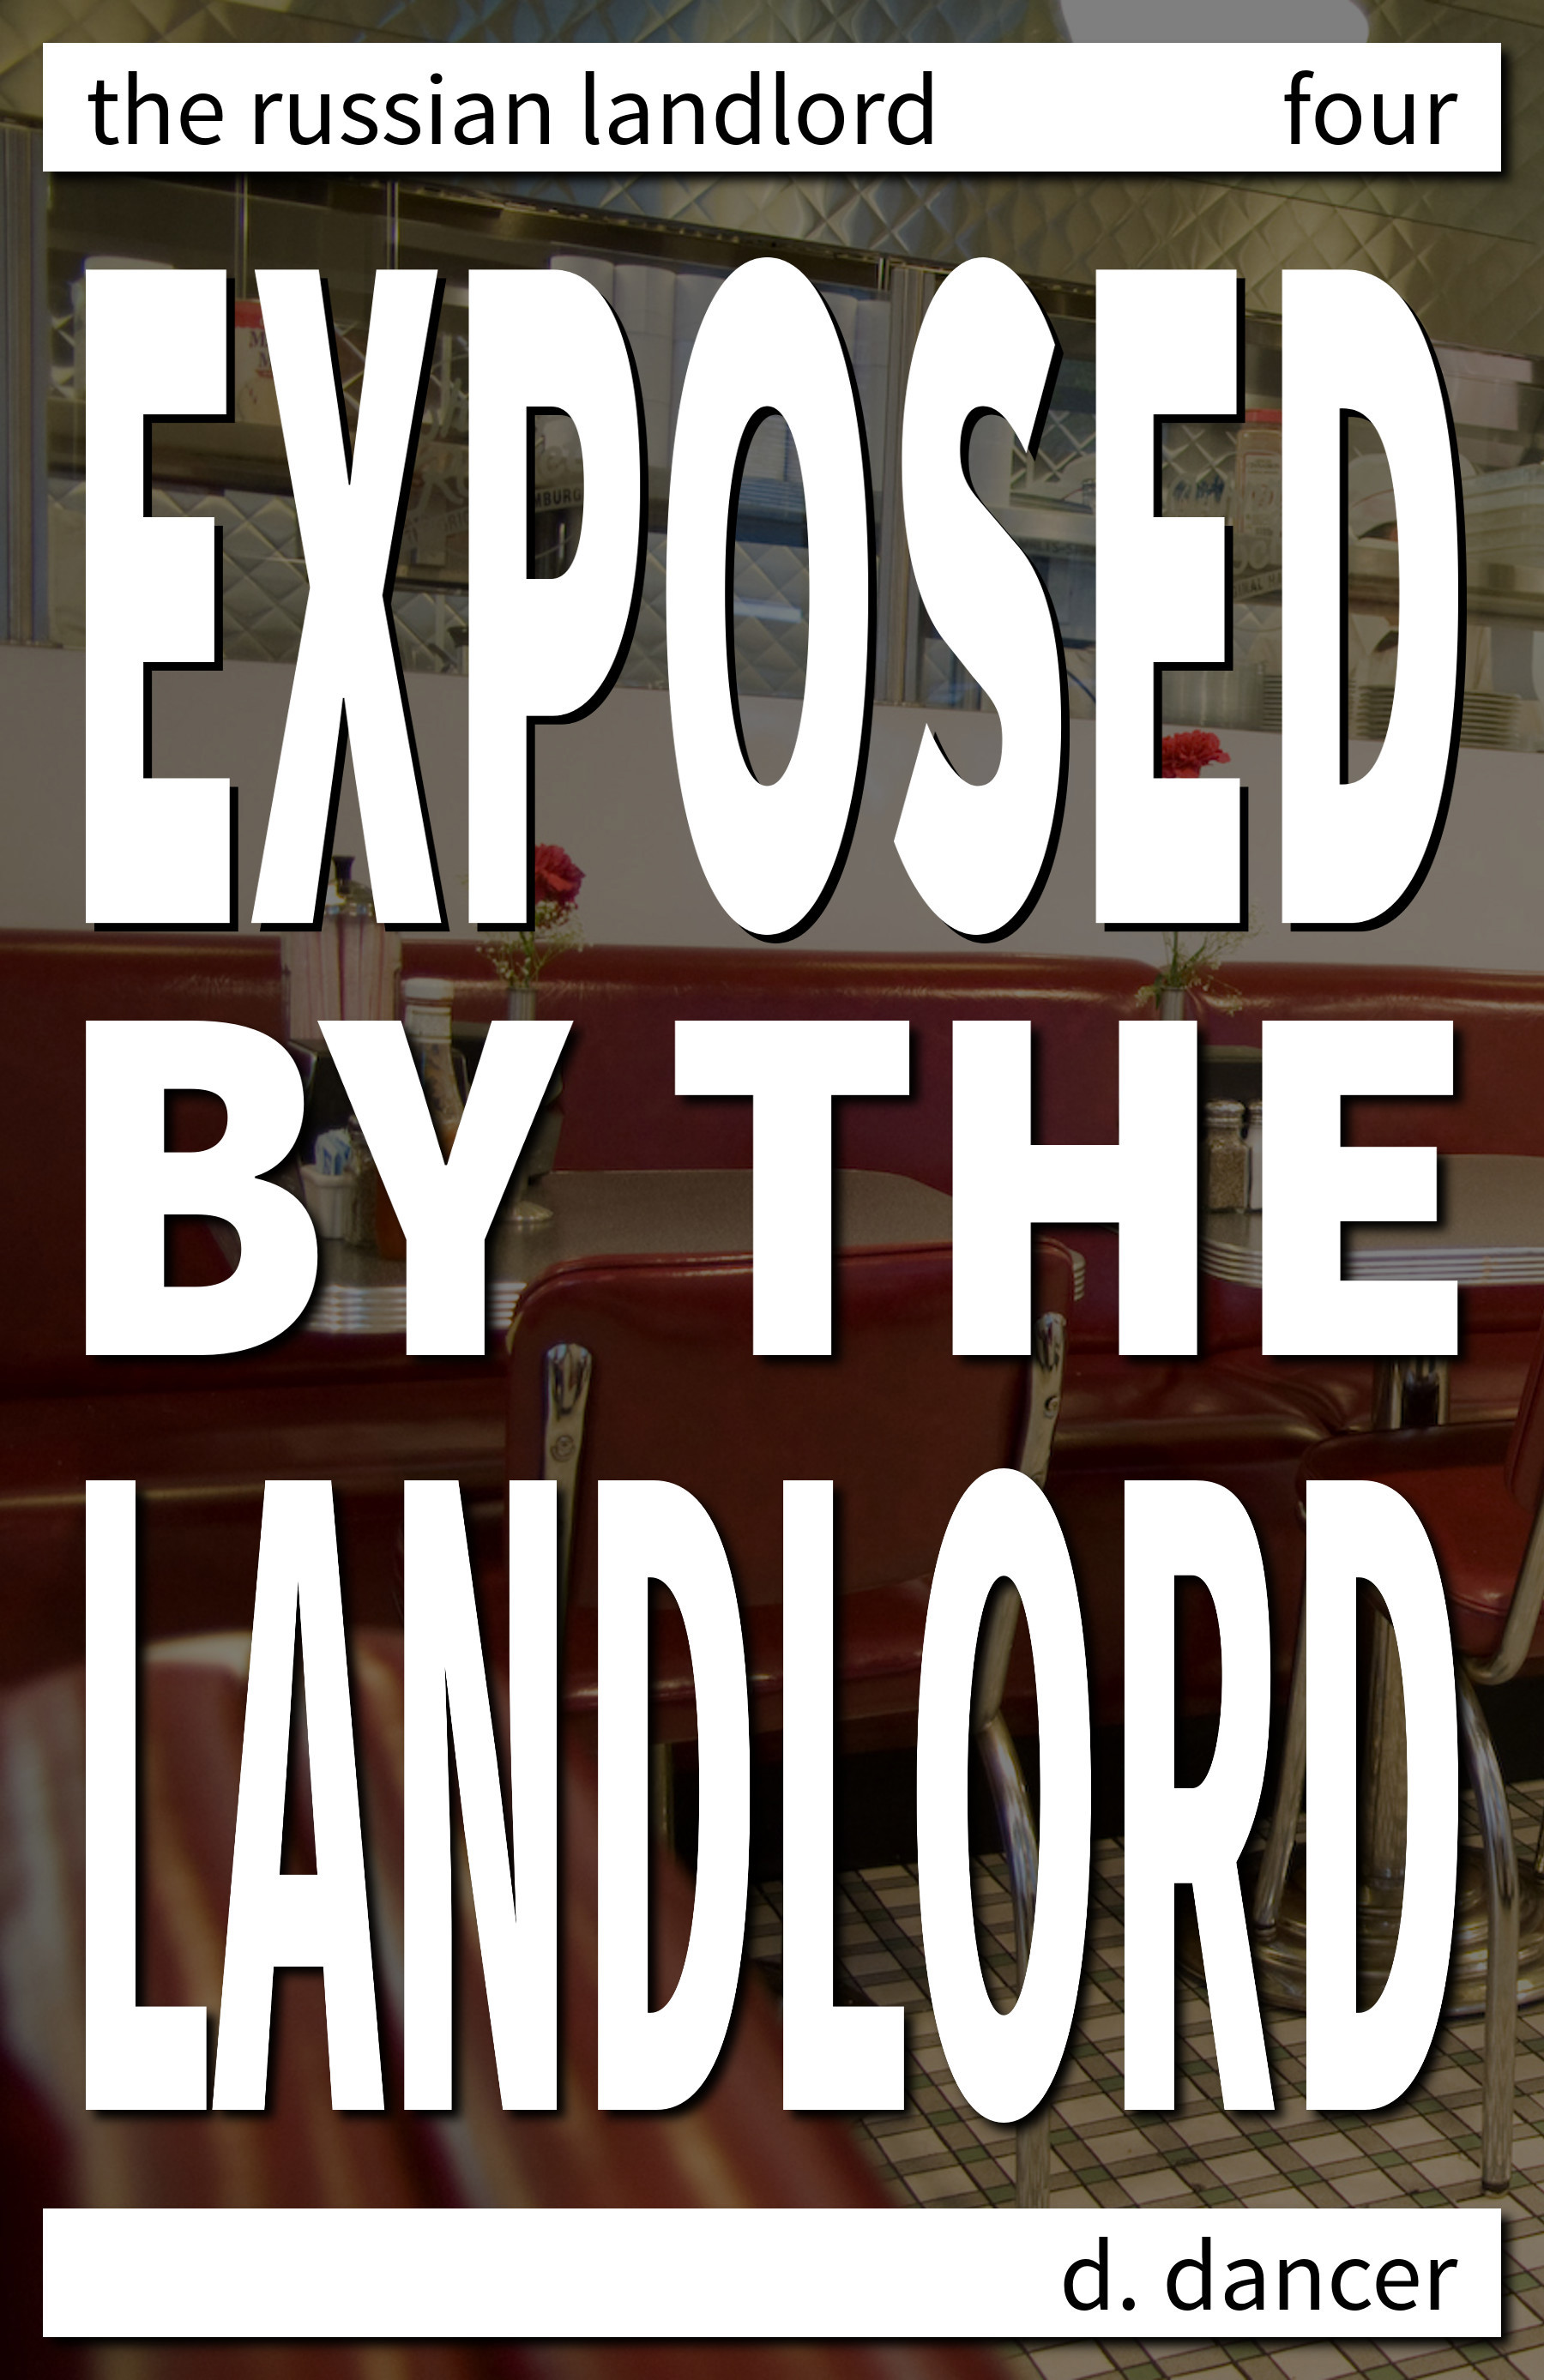 Exposed by the Landlord